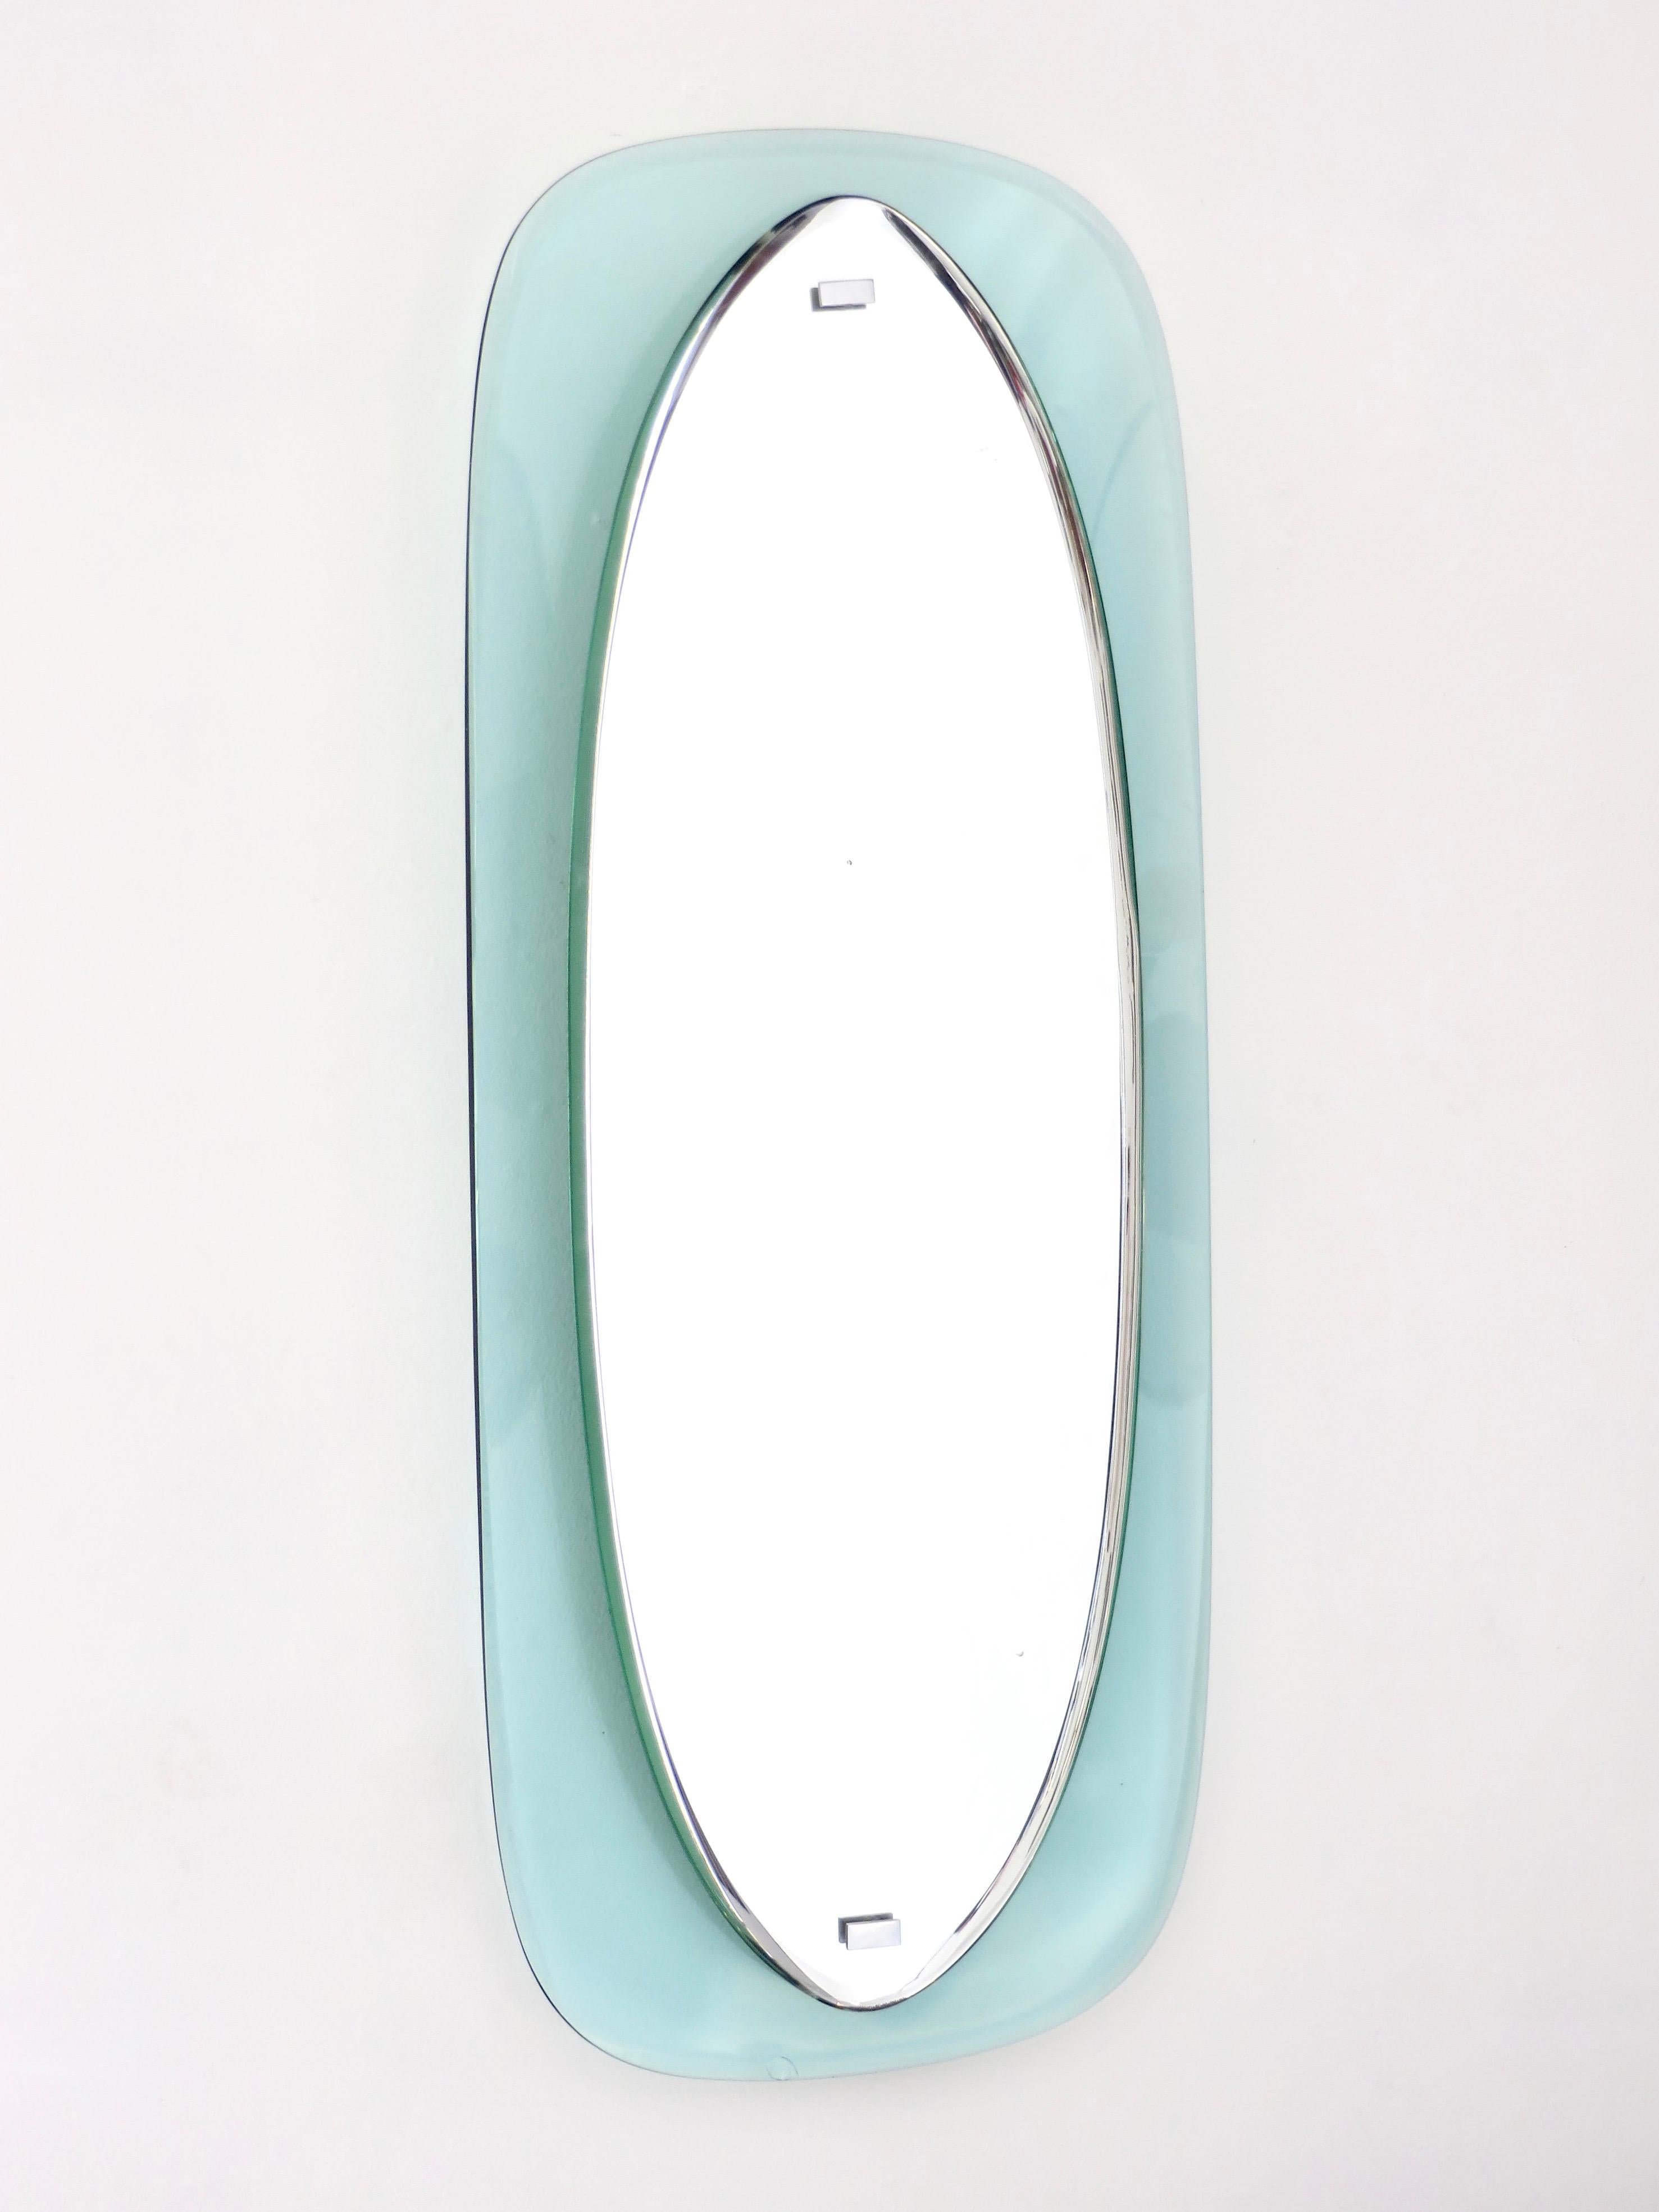 Oval Italian pale blue framed colored floating crystal beveled glass frame mirror with original looking glass by crystal Arte Circa 1960. 
In the shipping of this mirror there occurred a small éclat or conchoidal chip inside of the glass at the